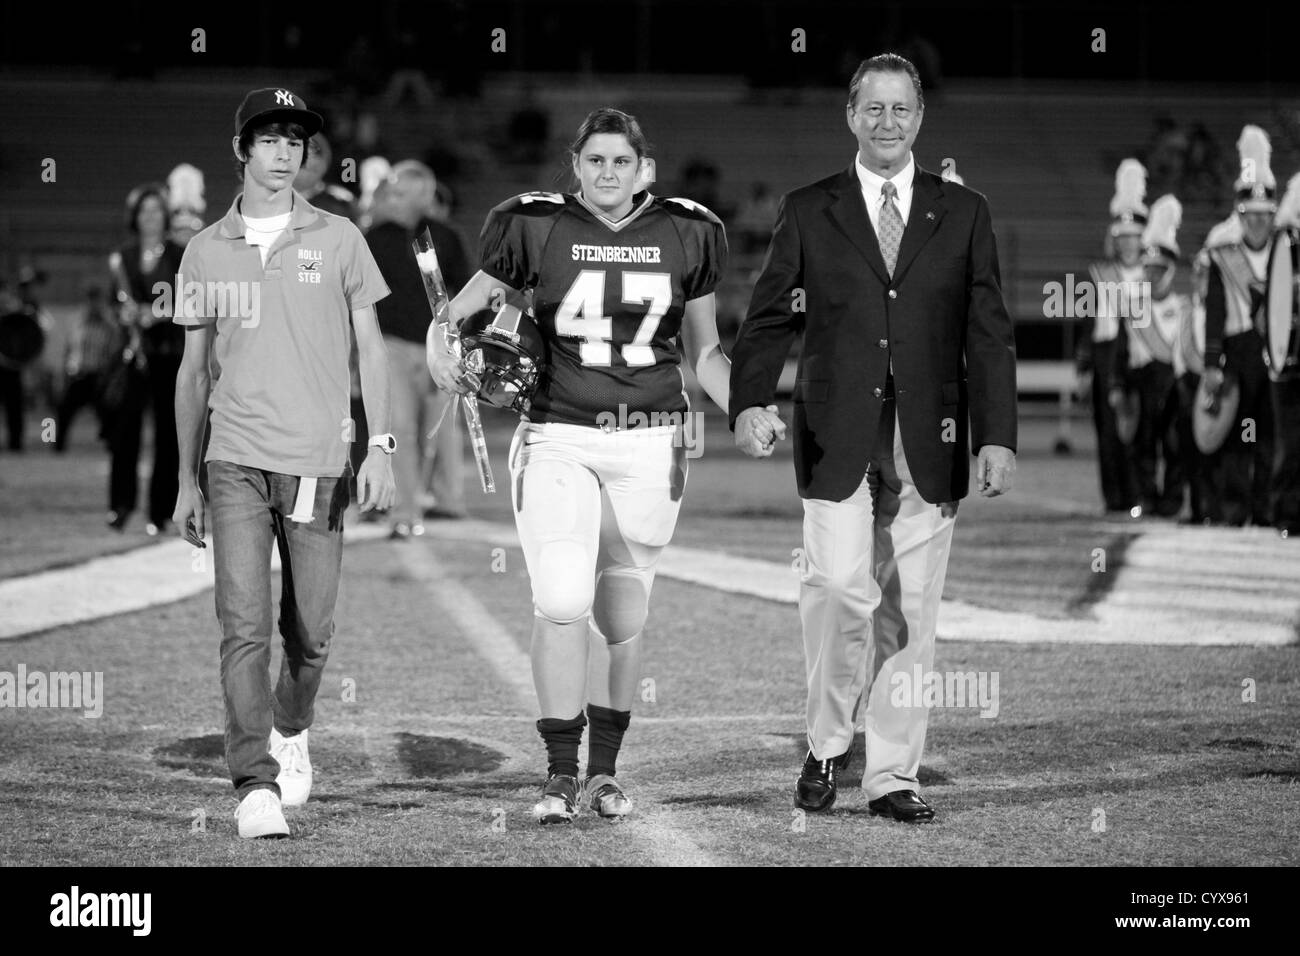 Nov. 02, 2012 - Tampa, Florida, U.S. - Jessica holds her father's hand, Wade Weatherman III as she walks with him and her brother, Wade Weatherman IV down the field at Steinbrenner High School during senior night on Friday evening. 'Since my mom passed away it's been a priority to get closer and have a better relationship with my dad,' said Weathermen. 'He's been extremely supportive of my athletics.' [Eve Edelheit, Times] (Credit Image: © Eve Edelheit/Tampa Bay Times/ZUMAPRESS.com) Stock Photo